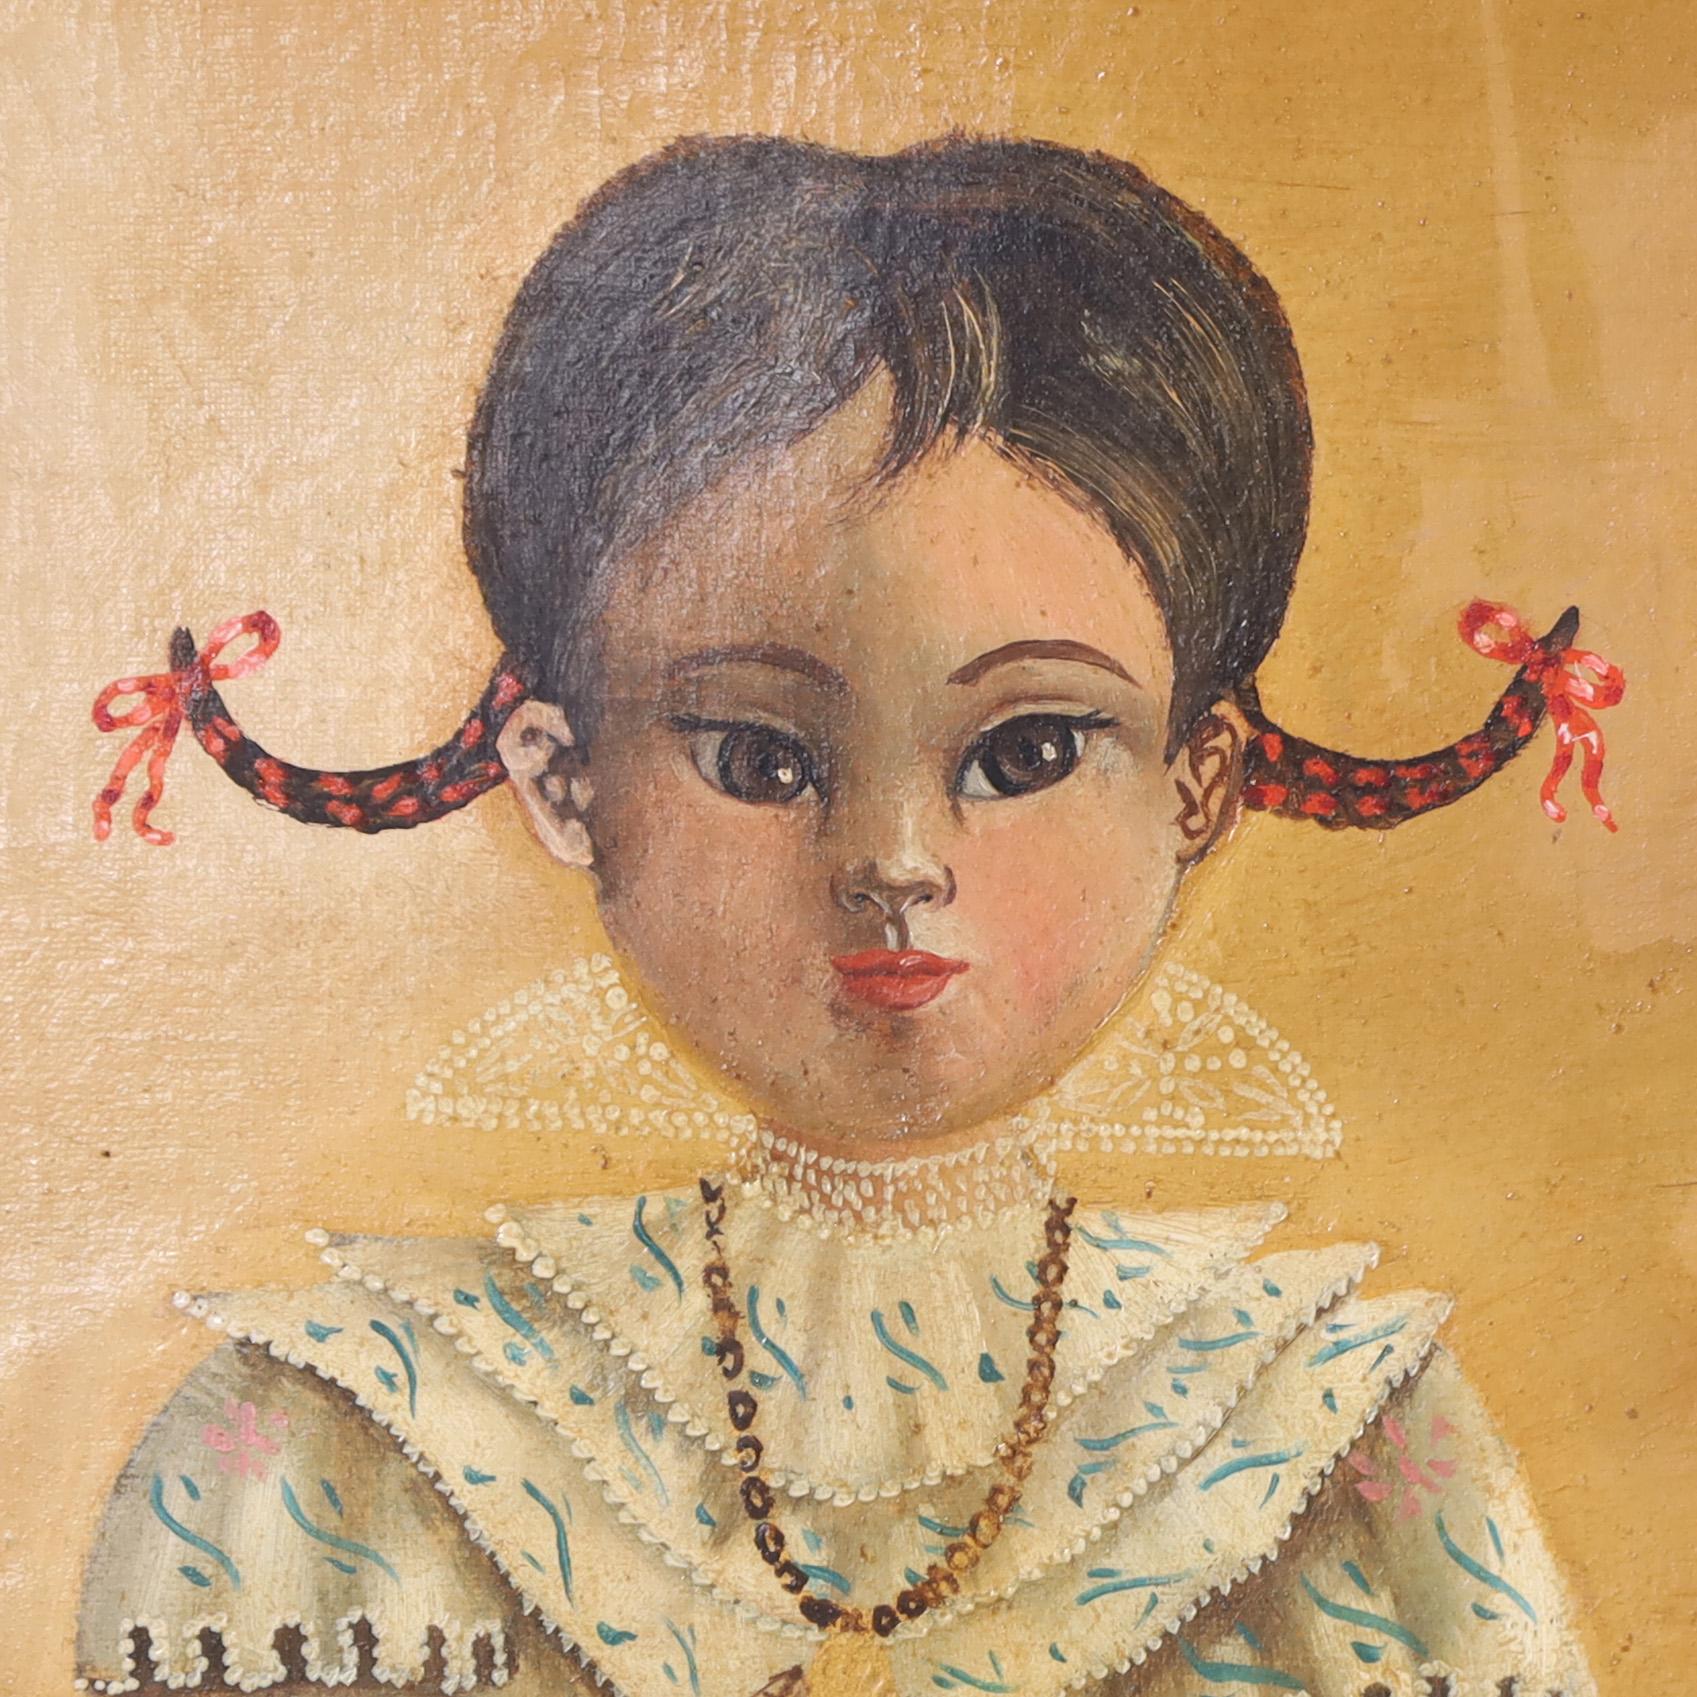 Hand-Painted Agipito Labios Folk Art Painting of a Girl with Dogs